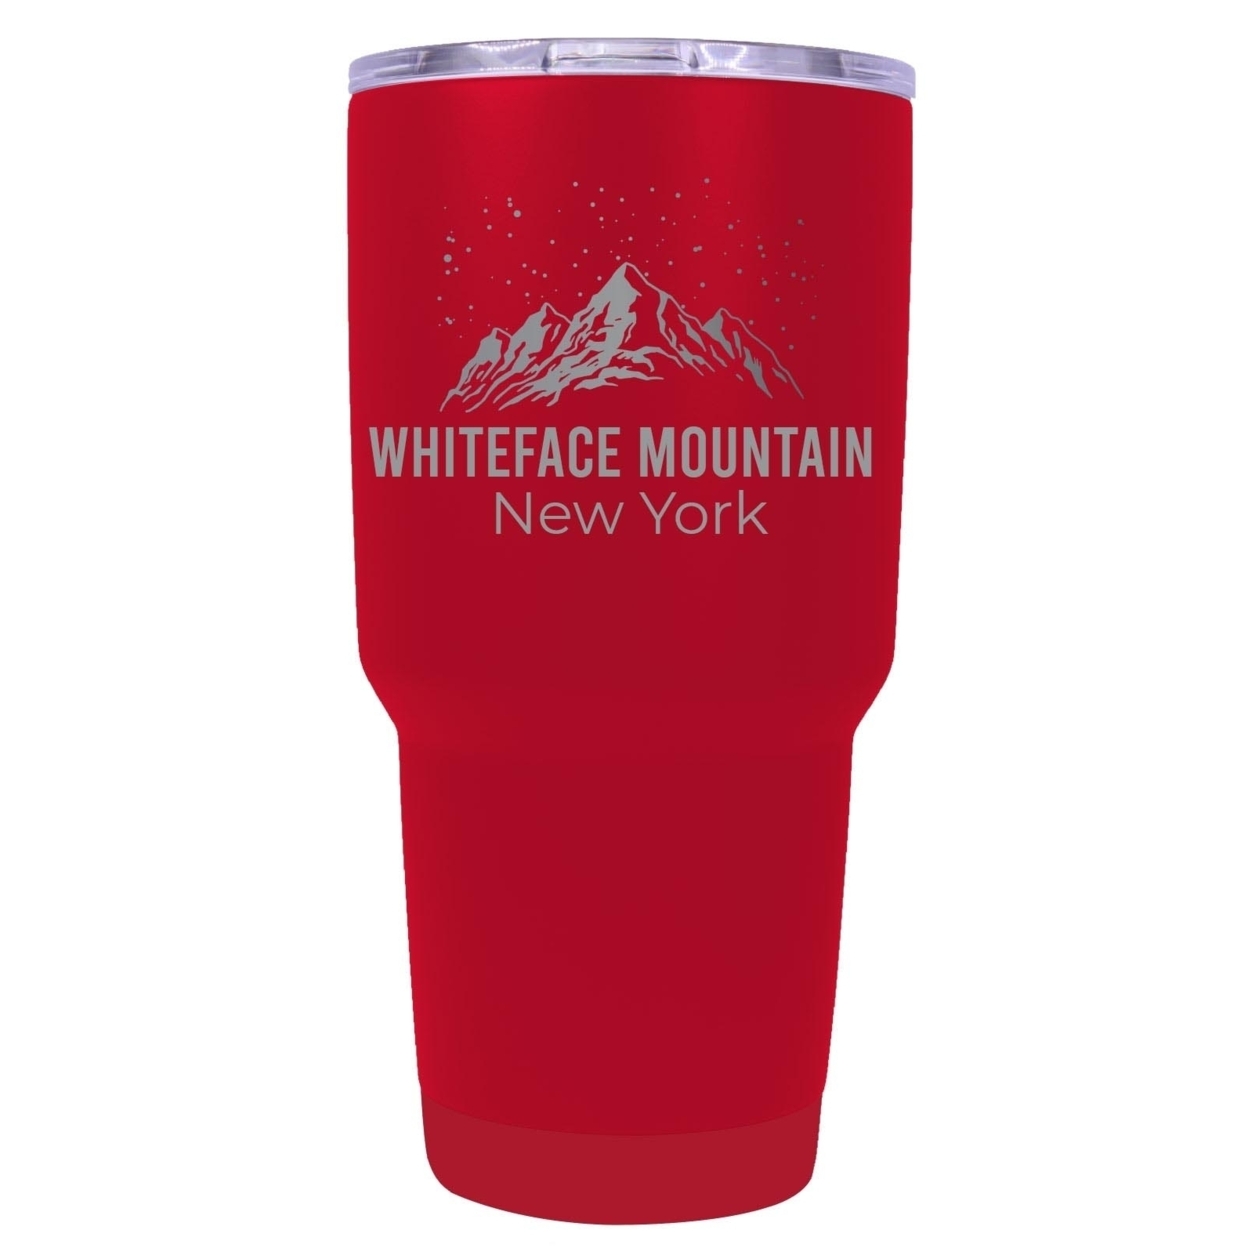 Whiteface Mountain New York Ski Snowboard Winter Souvenir Laser Engraved 24 Oz Insulated Stainless Steel Tumbler - Red